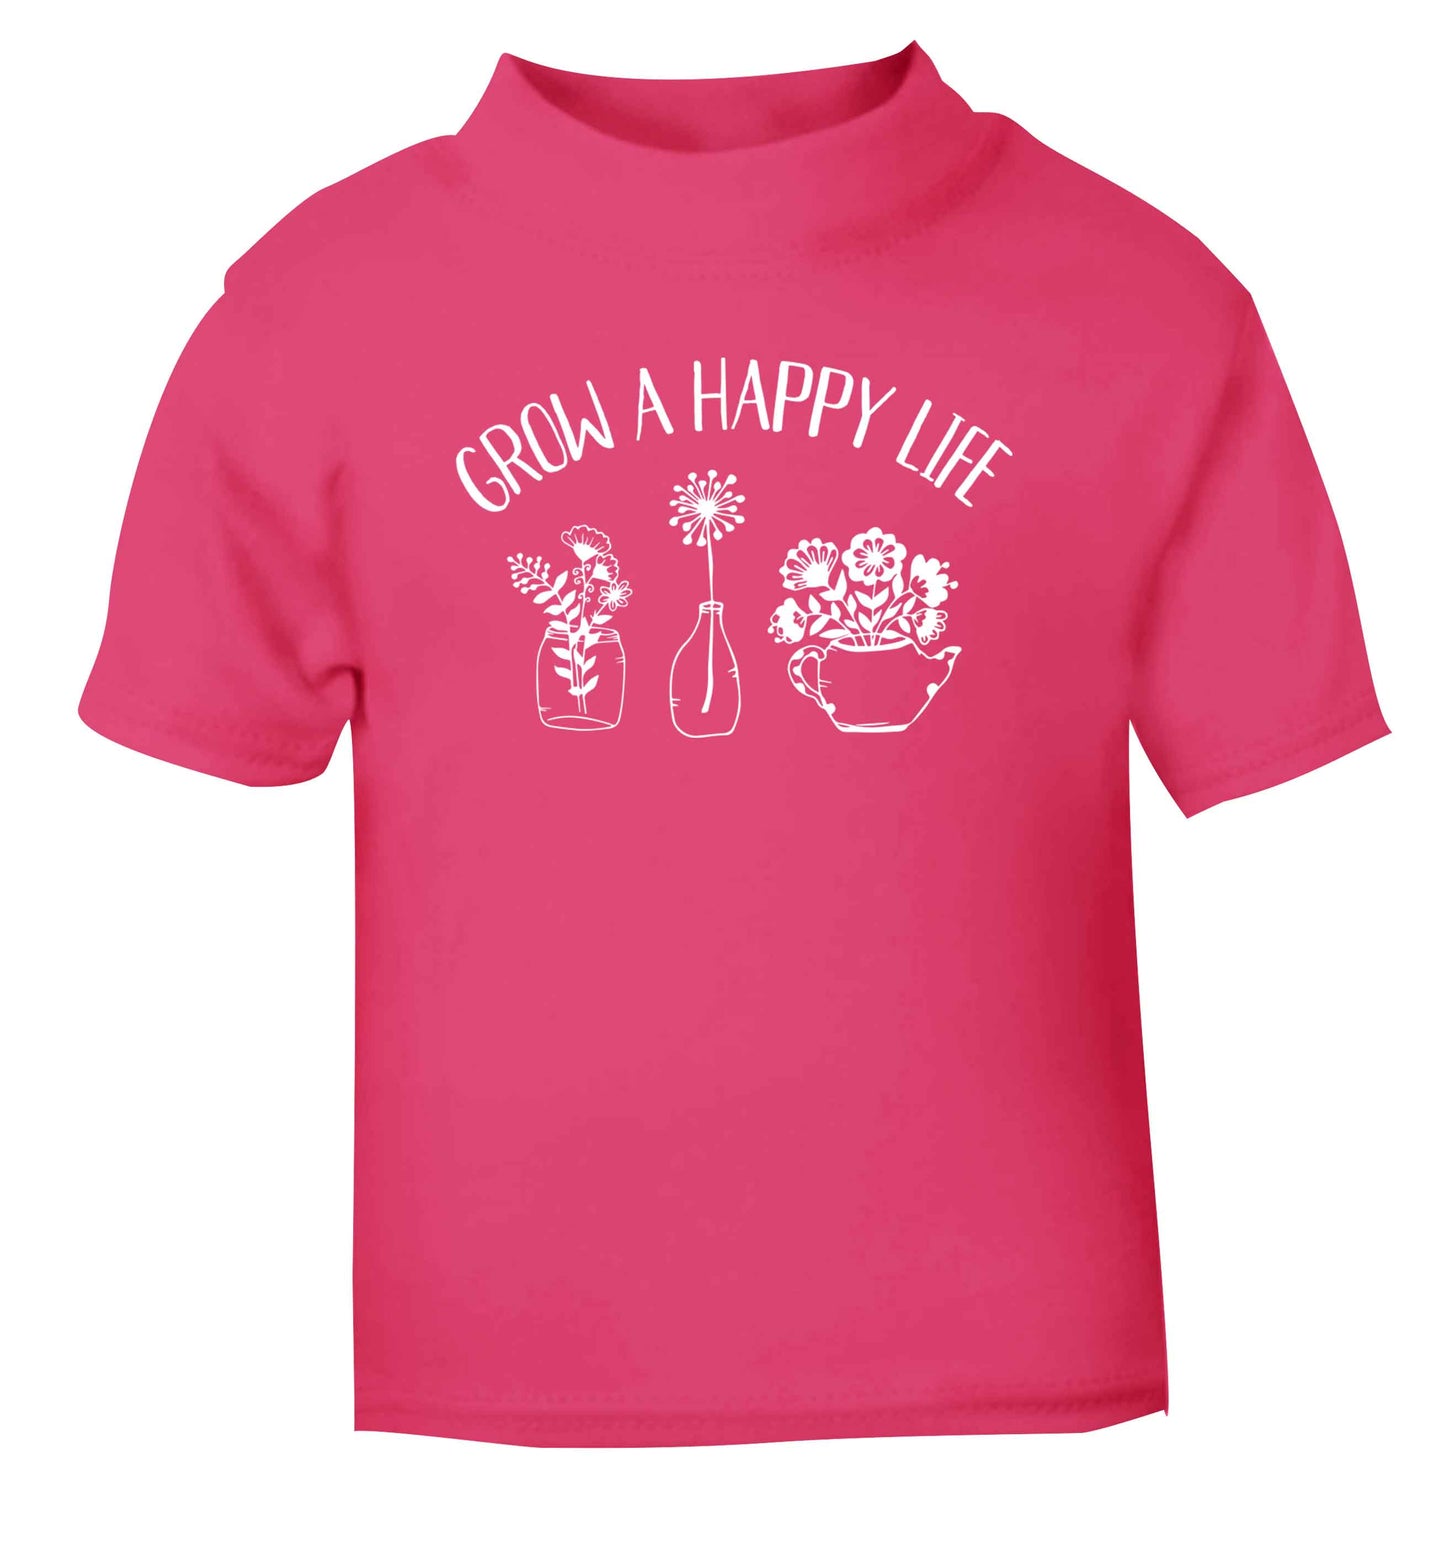 Grow a happy life pink Baby Toddler Tshirt 2 Years